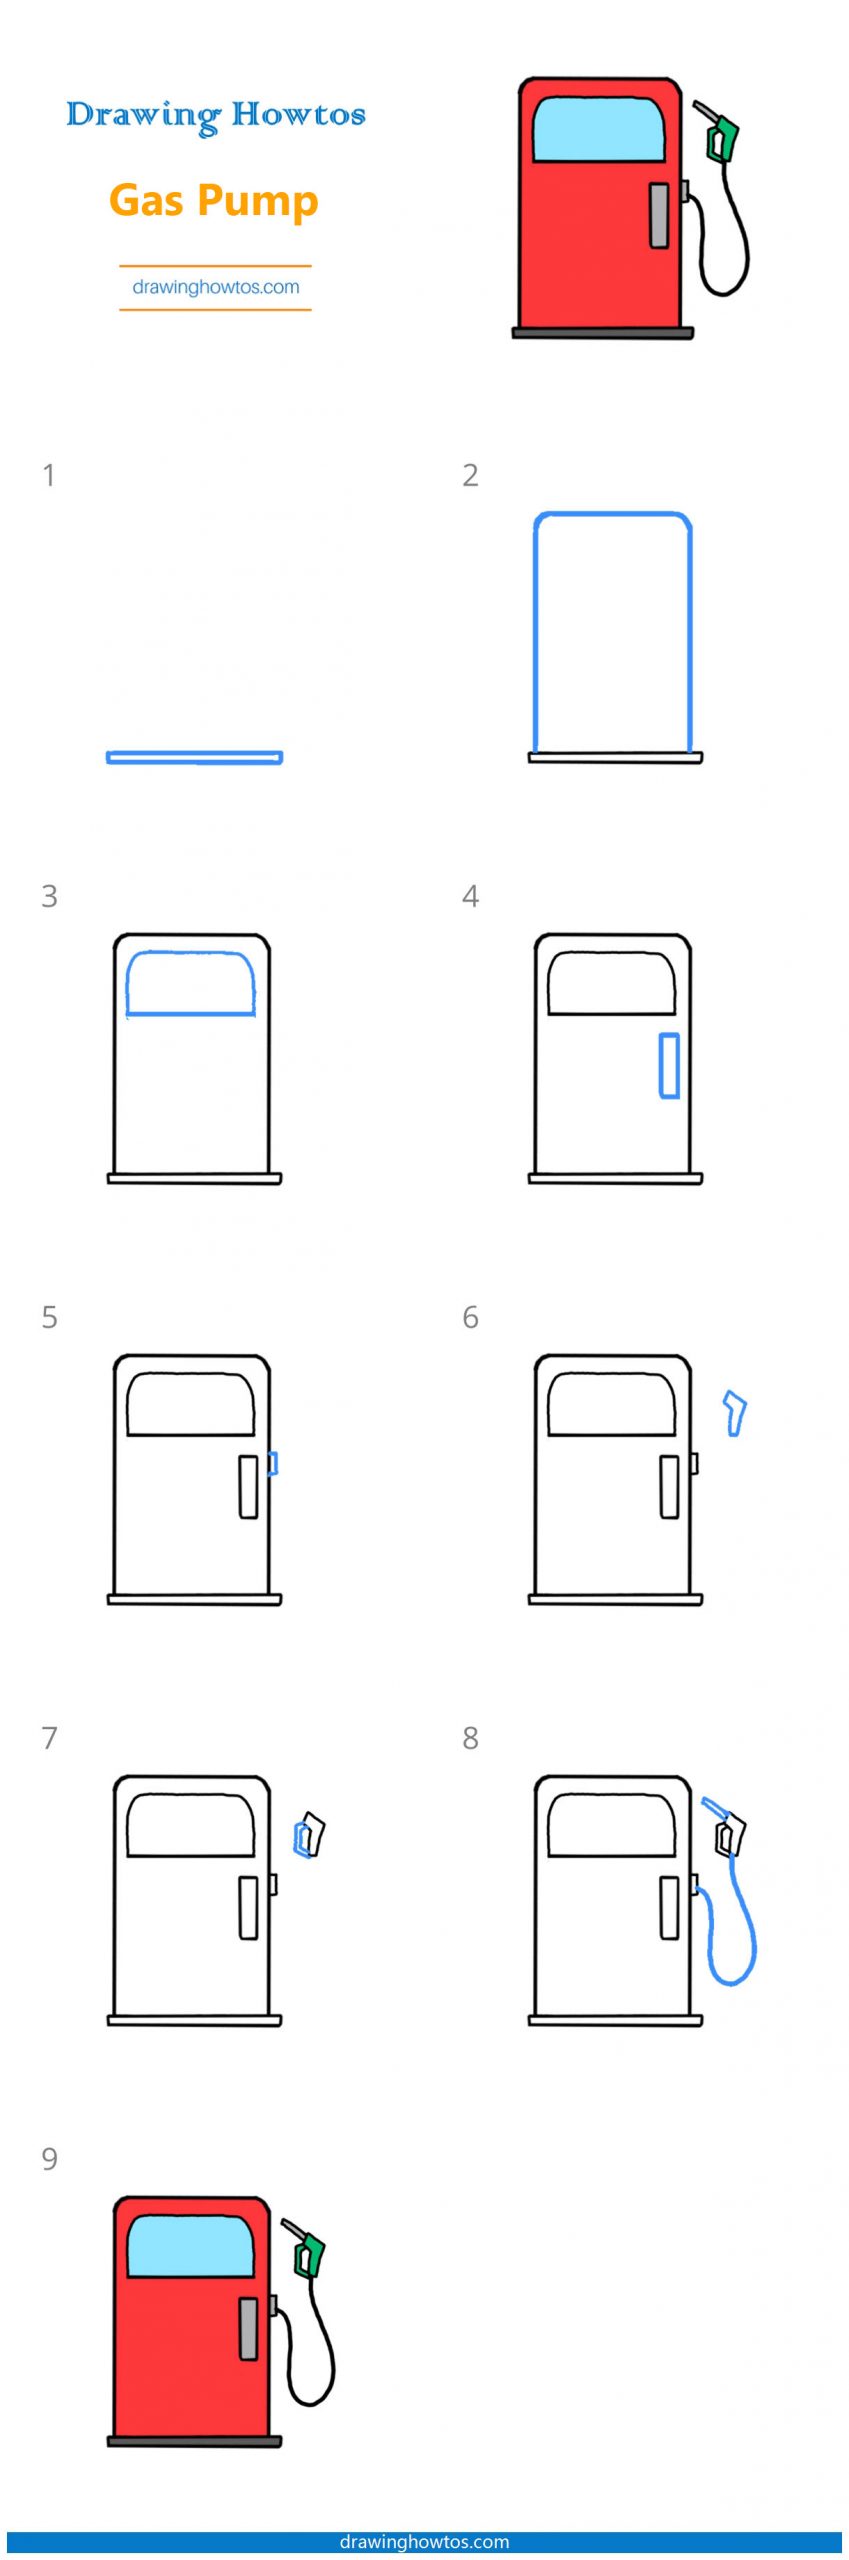 How to Draw a Gas Pump Step by Step